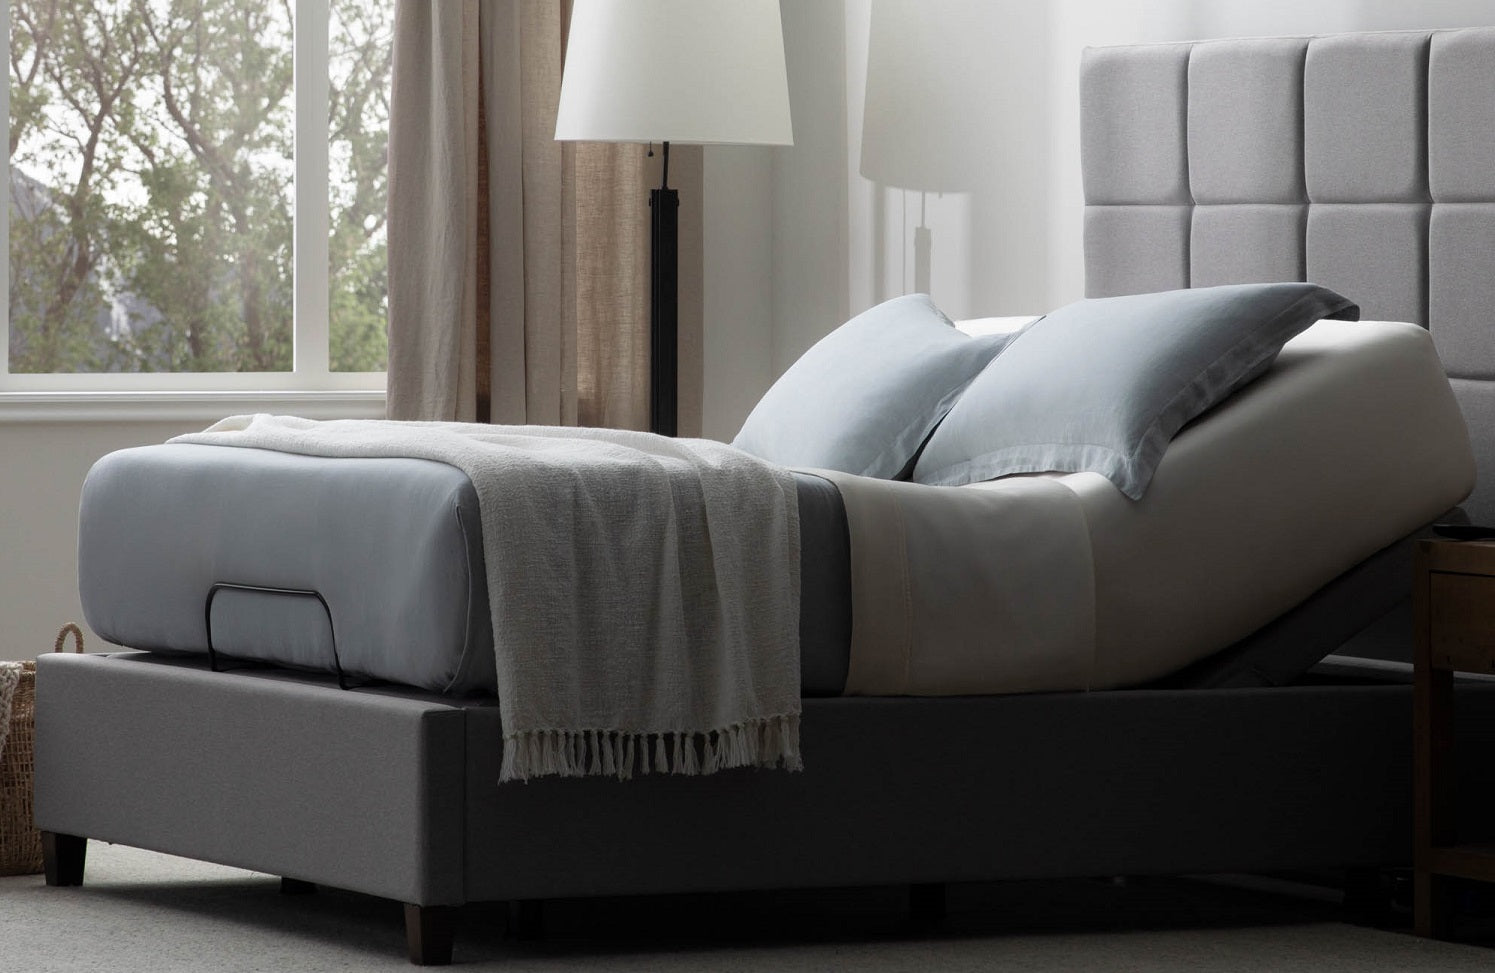 adjustable beds and bases in luxurious bedroom